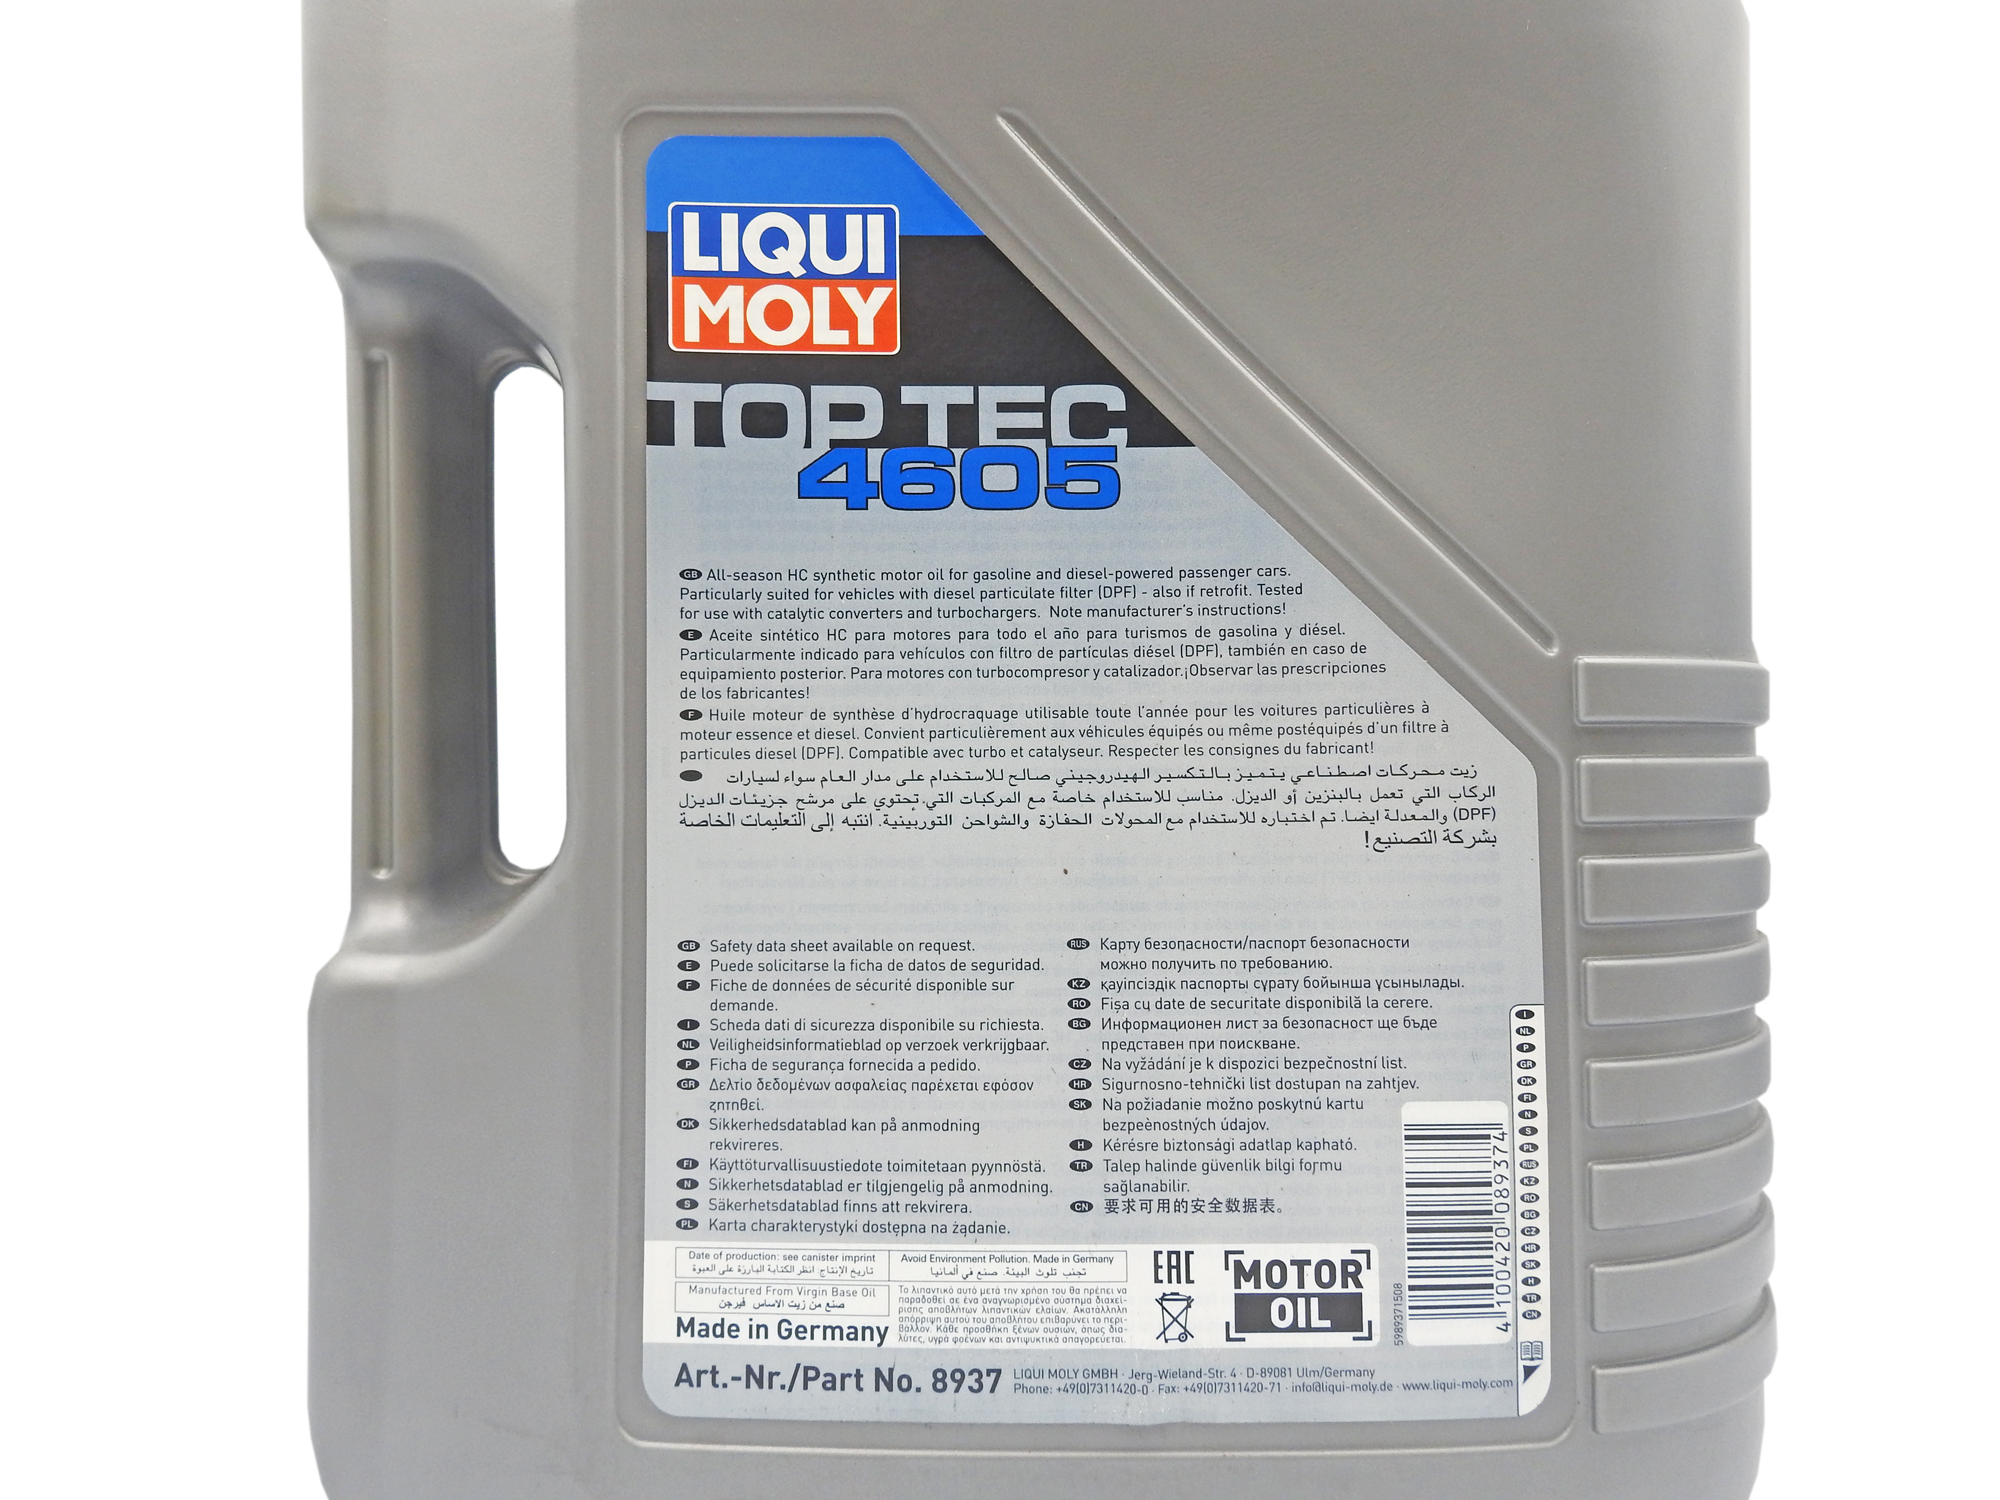 Engine Oil - Liqui Moly Top Tec 4600 - 5W-30 Synthetic (1 Liter